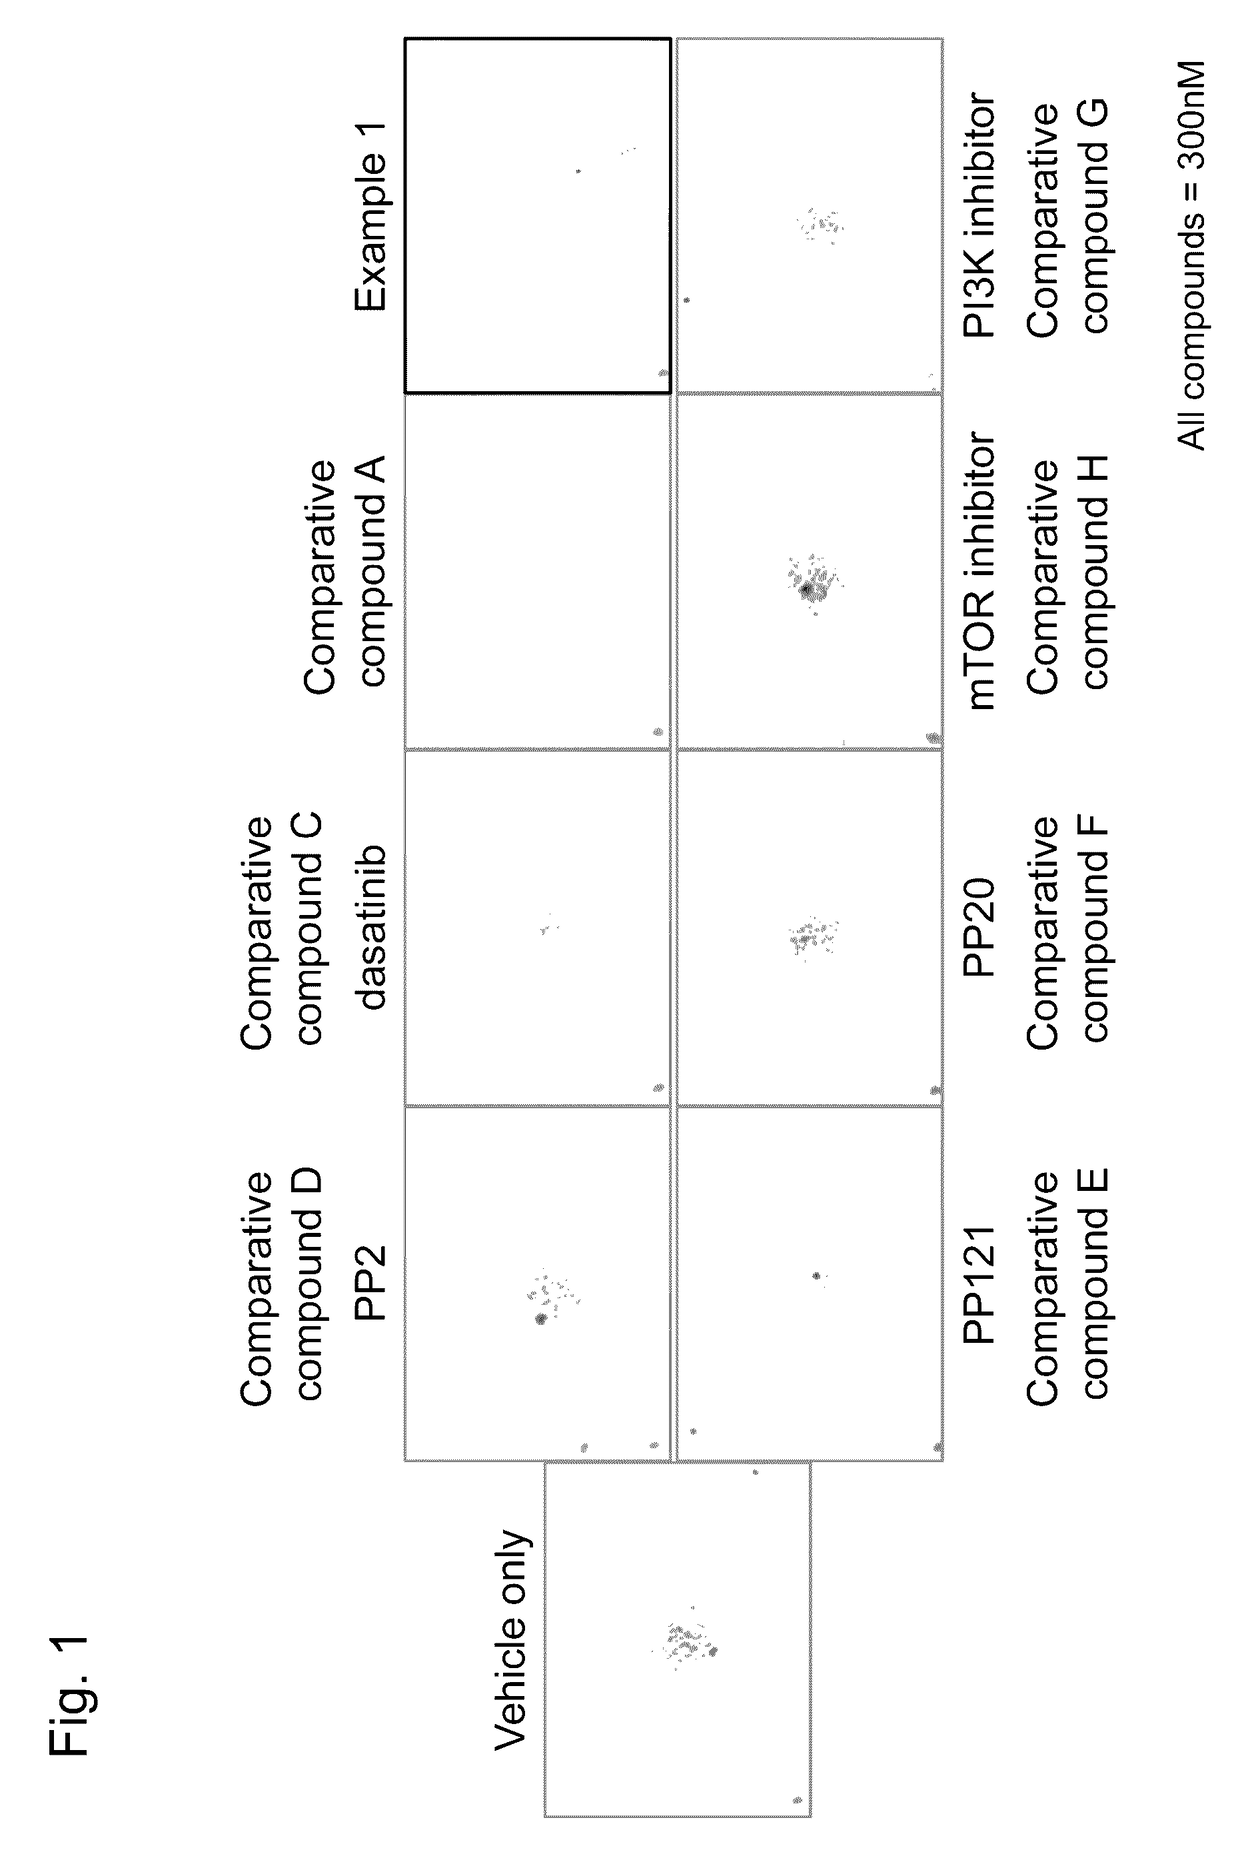 Agent for treating or inhibiting recurrence of acute myeloid leukemia